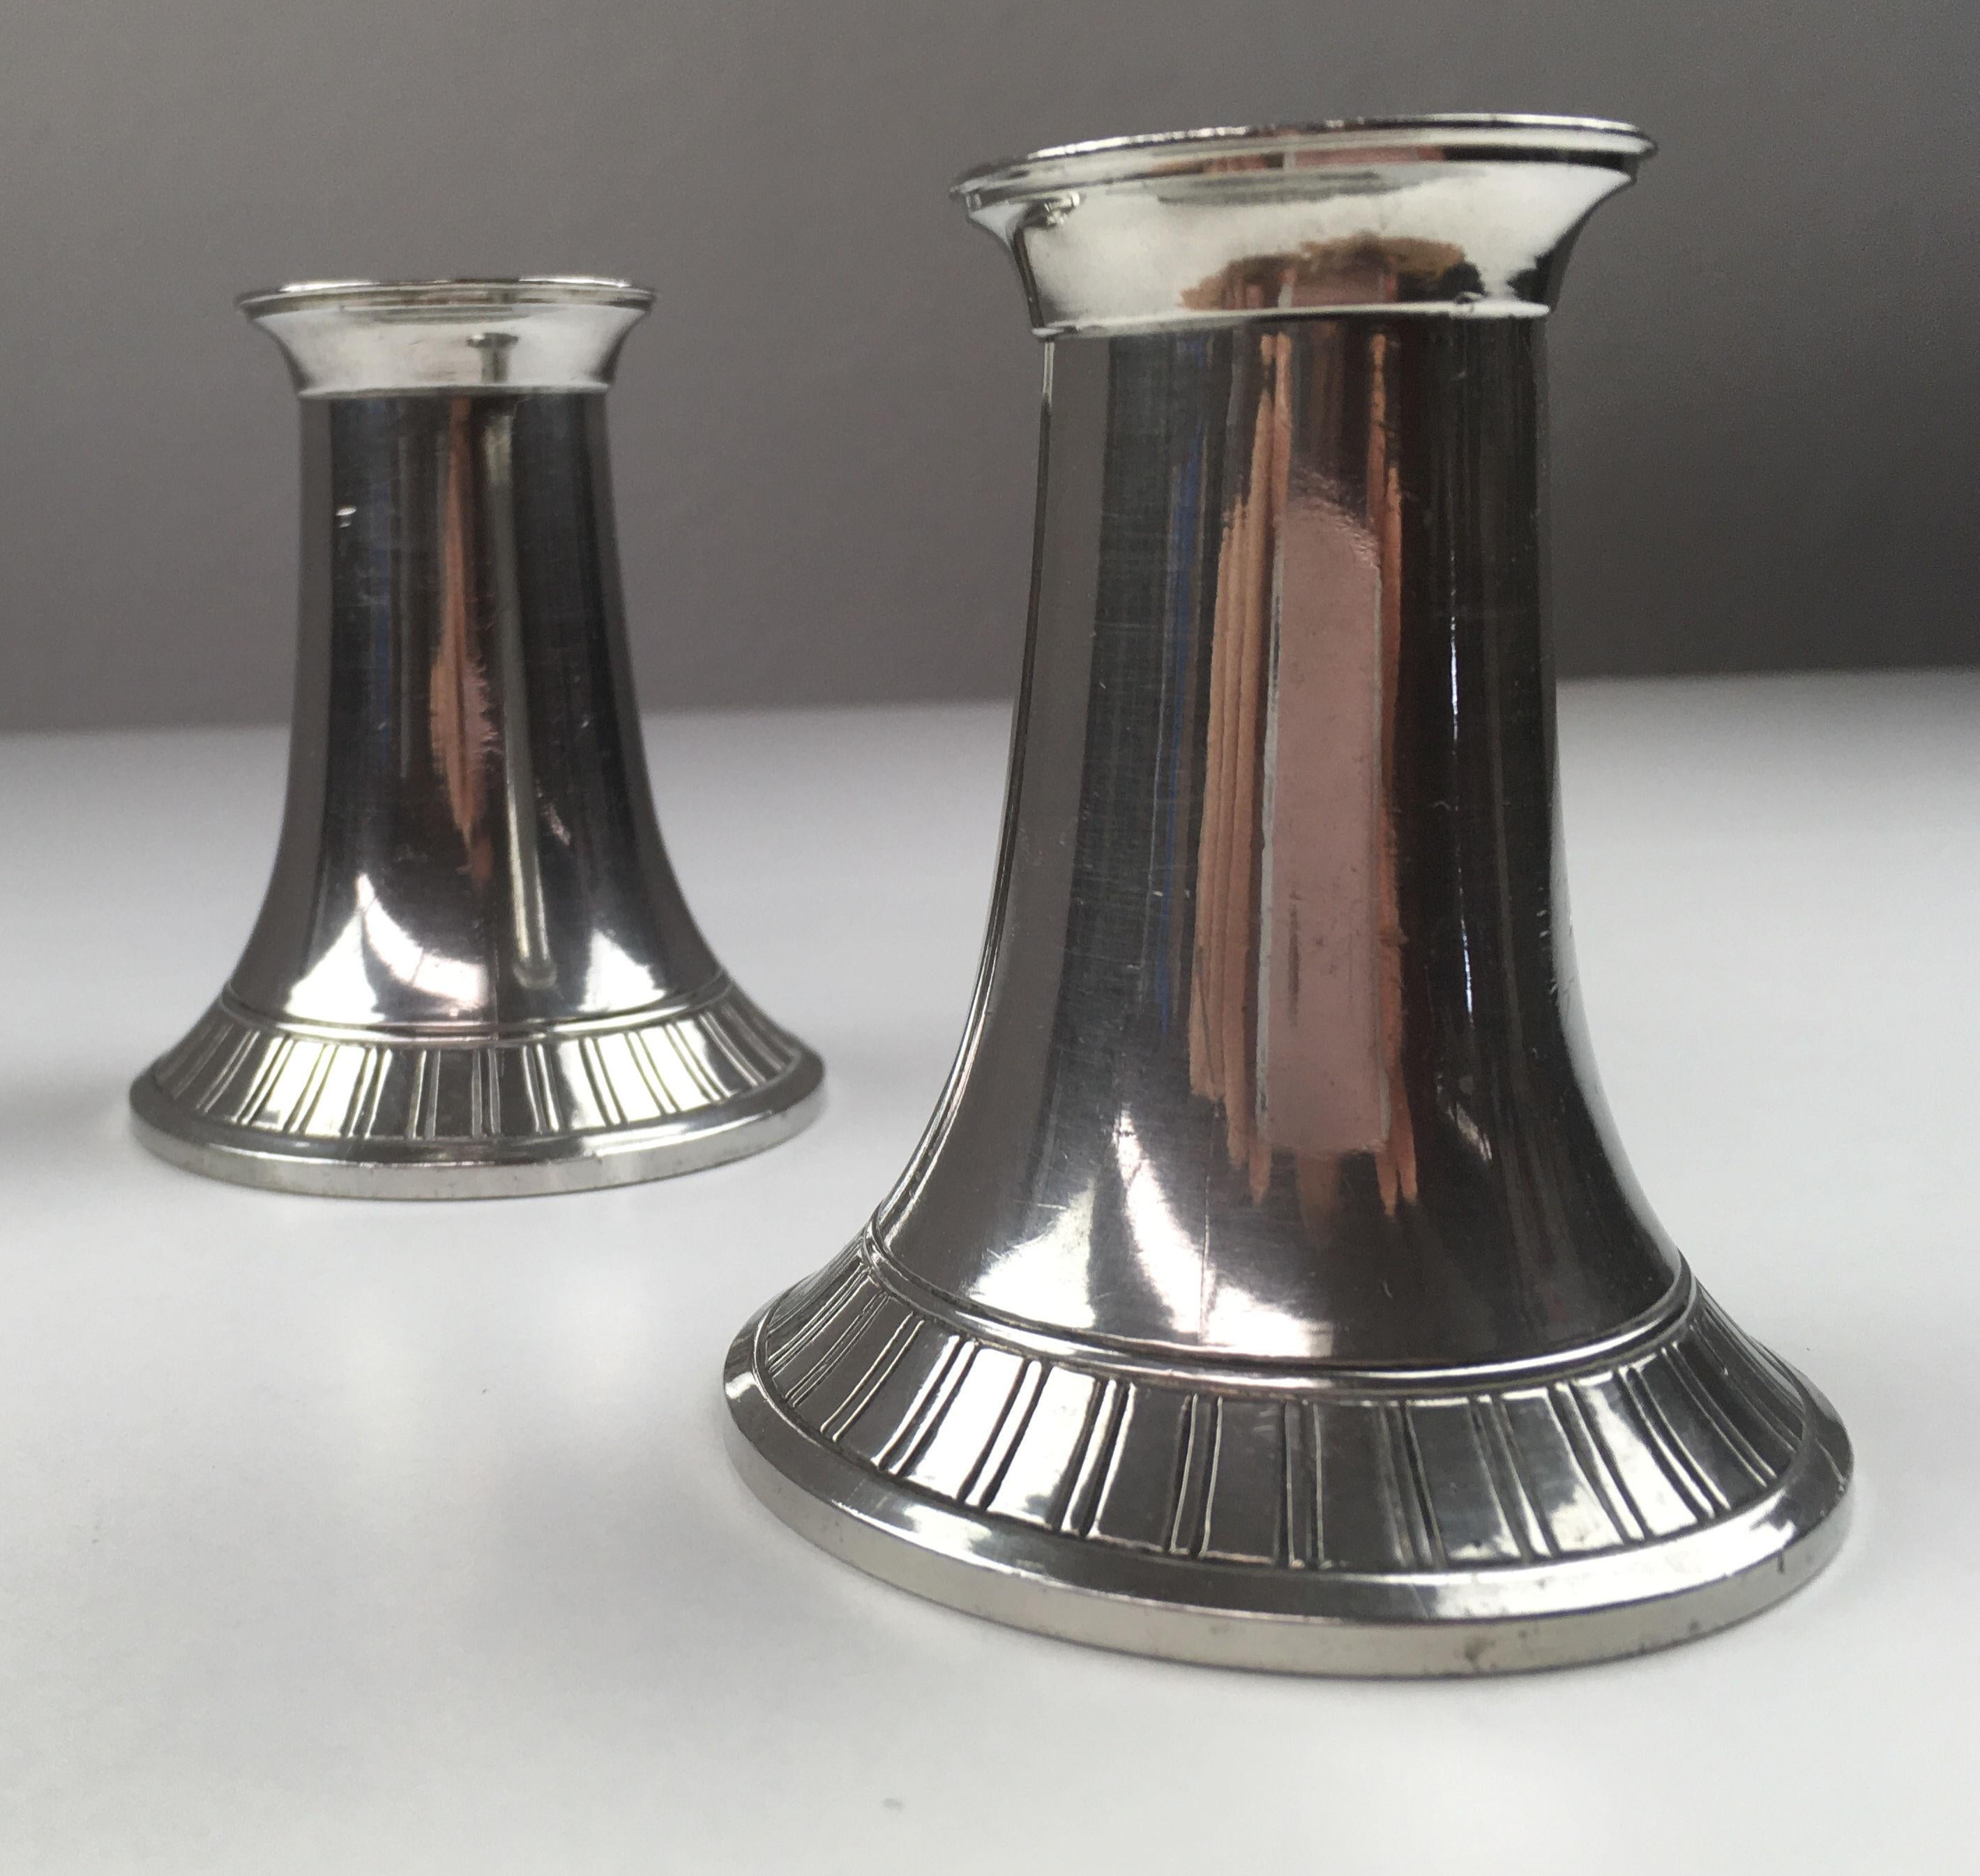 Set of two Danish Just Andersen mid century candle holders produced by Just Andersen A/S in the 1940 - 1950´s.

The candle holders are in good vintage condition and marked with Just. Andersens triangle mark. 

Just Andersen 1884-1943 was born in